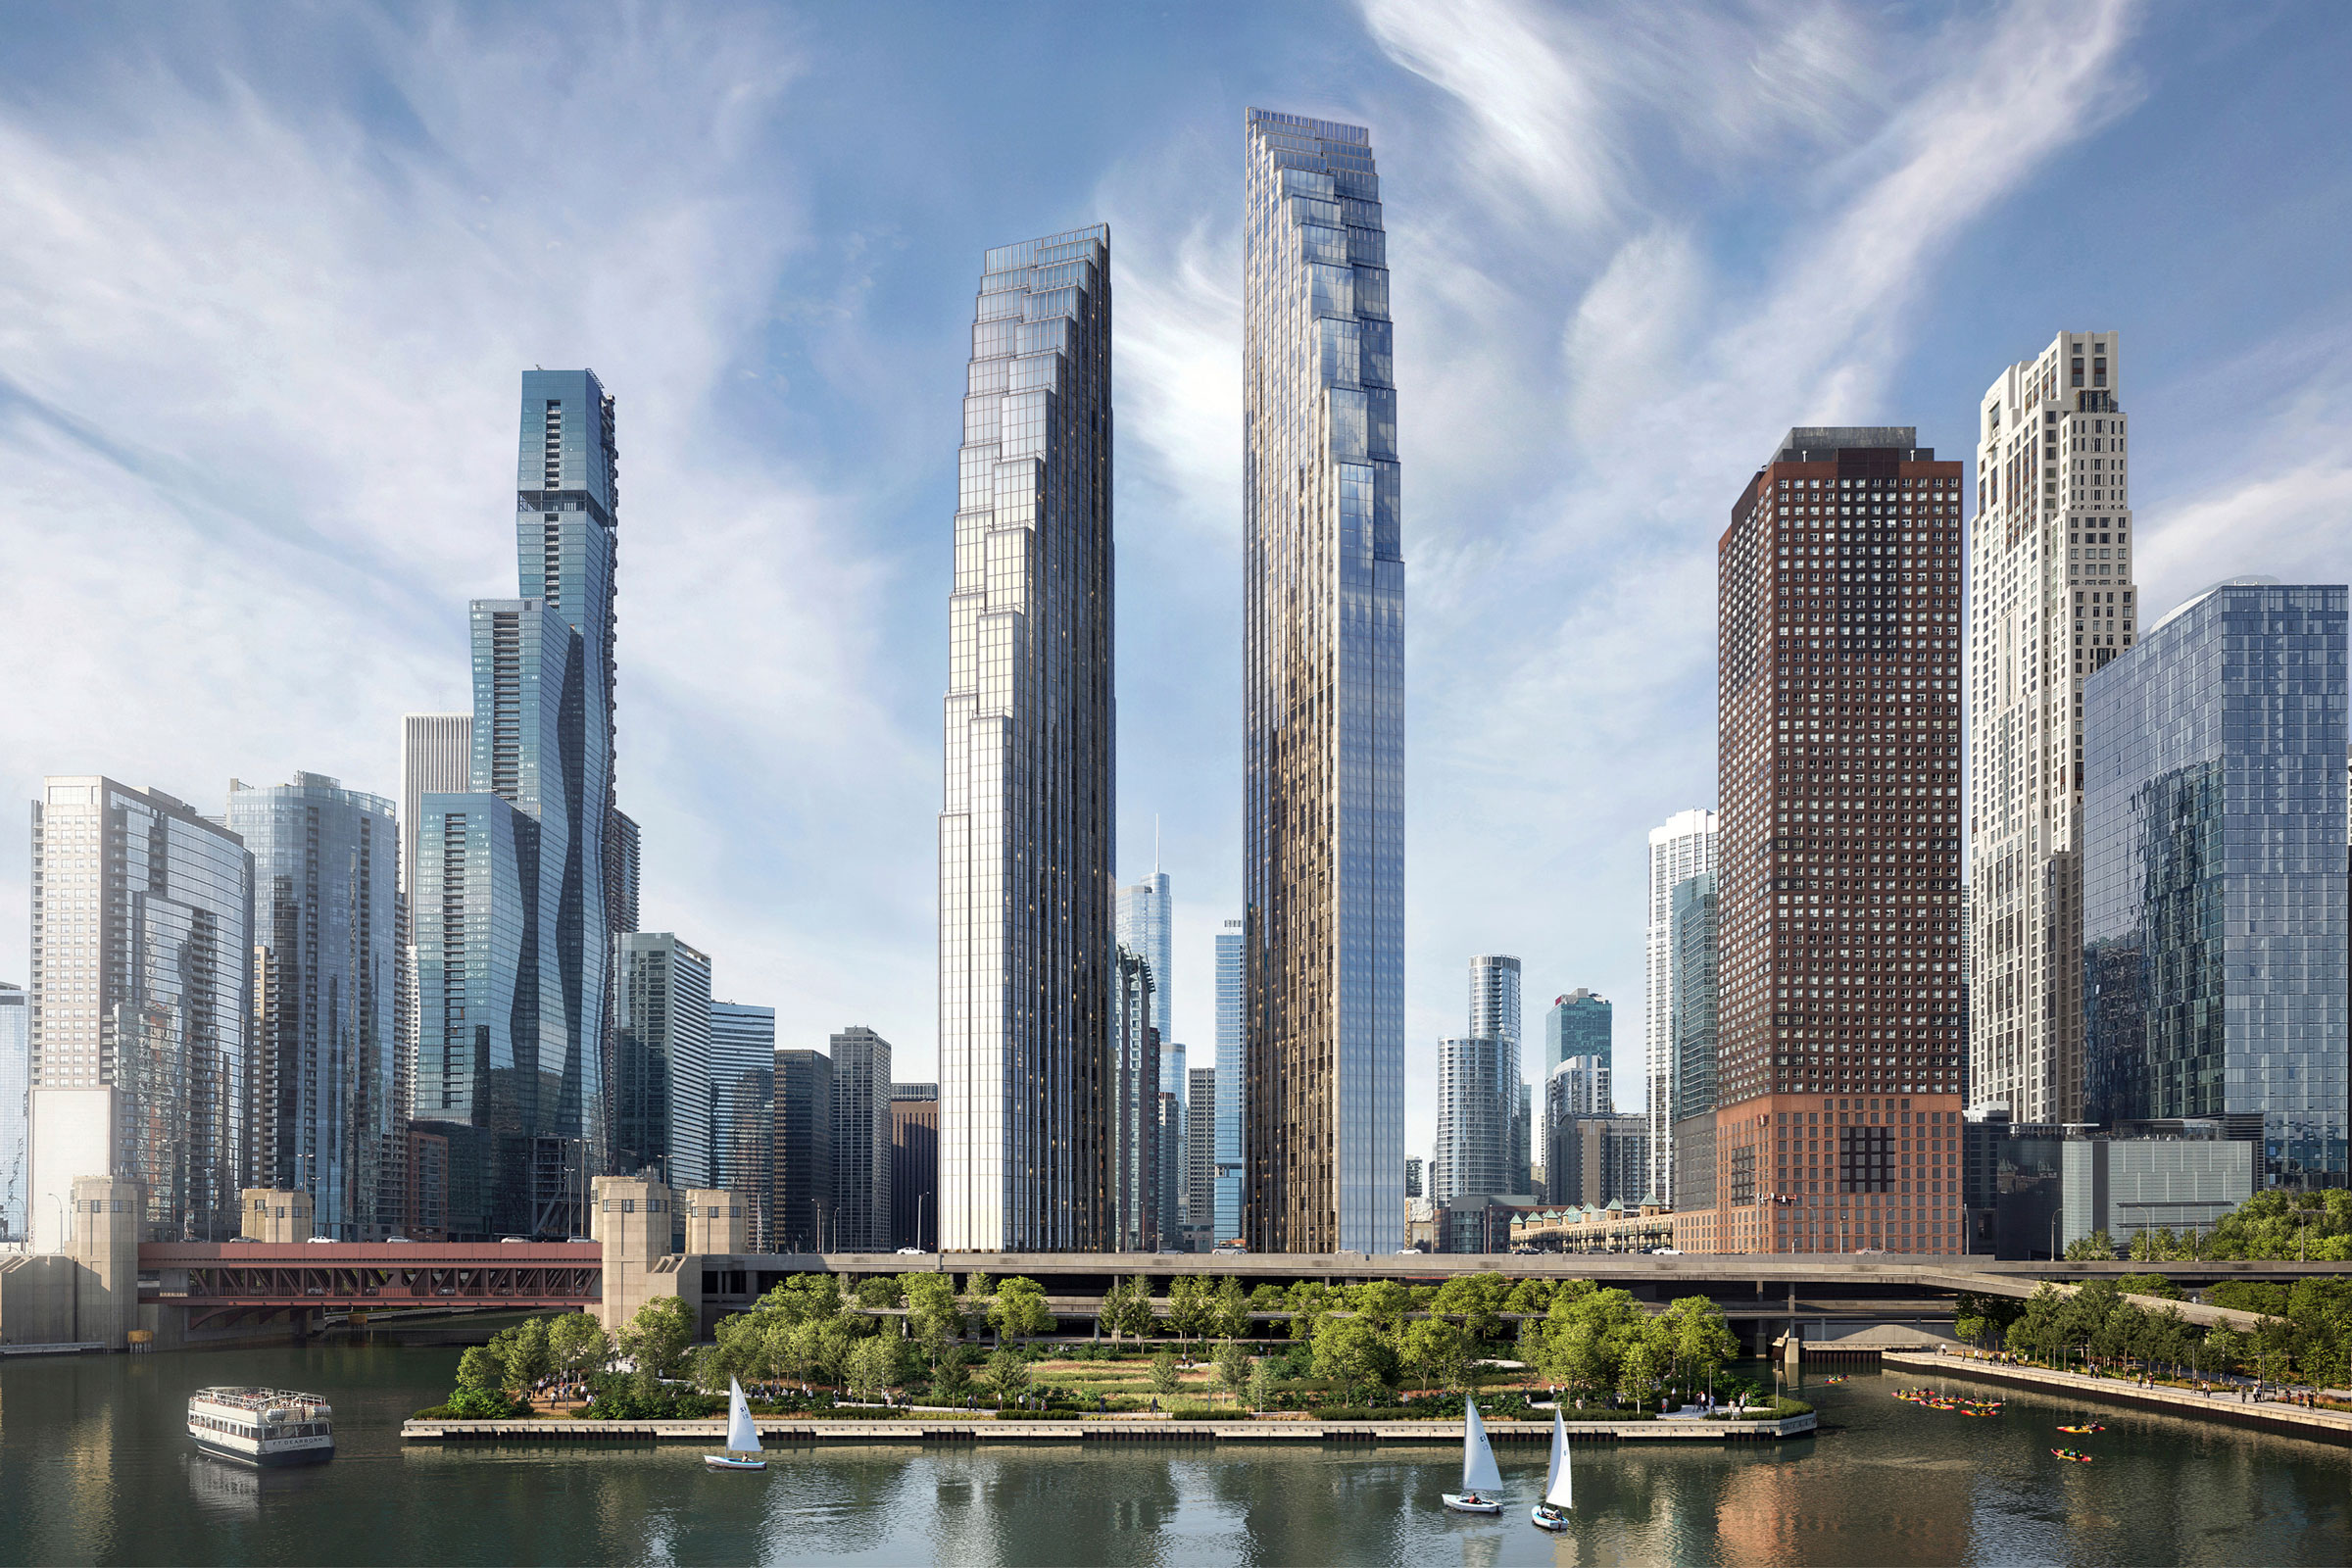 SOM is Filling a Void with Flexible Skyscraper Design at 400 Lake Shore